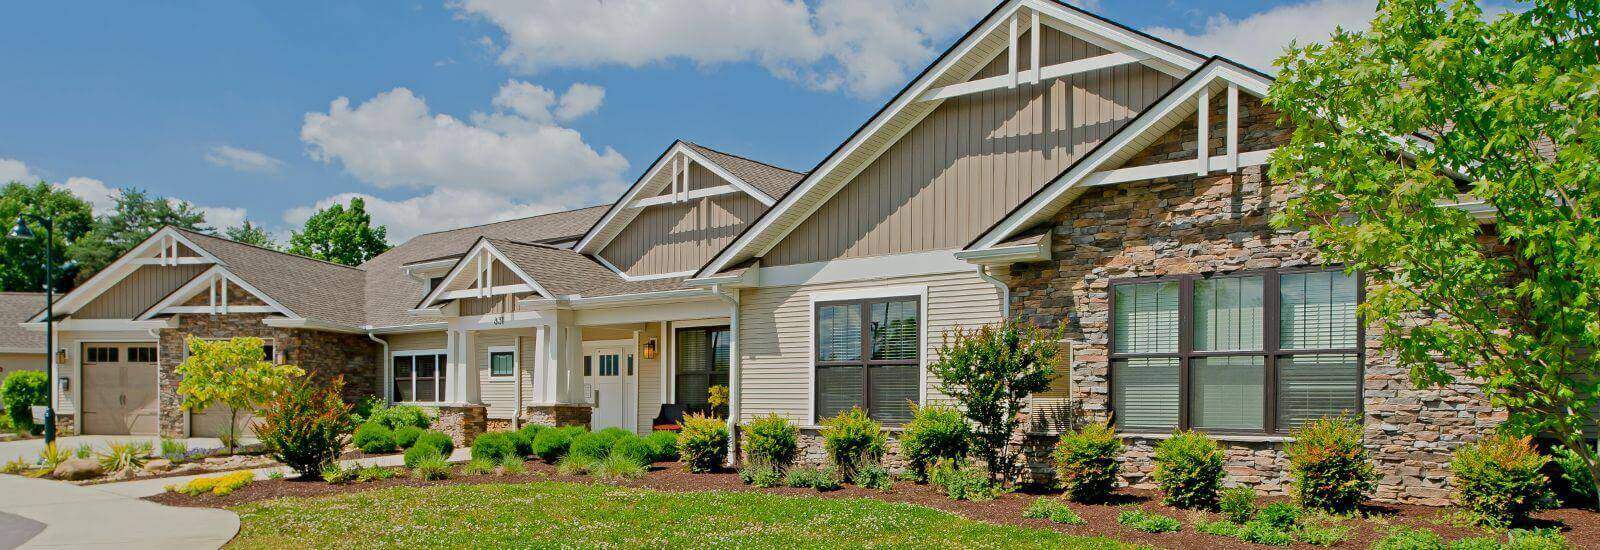 exterior of Alpine and Beech homes in the assisted living and memory care community